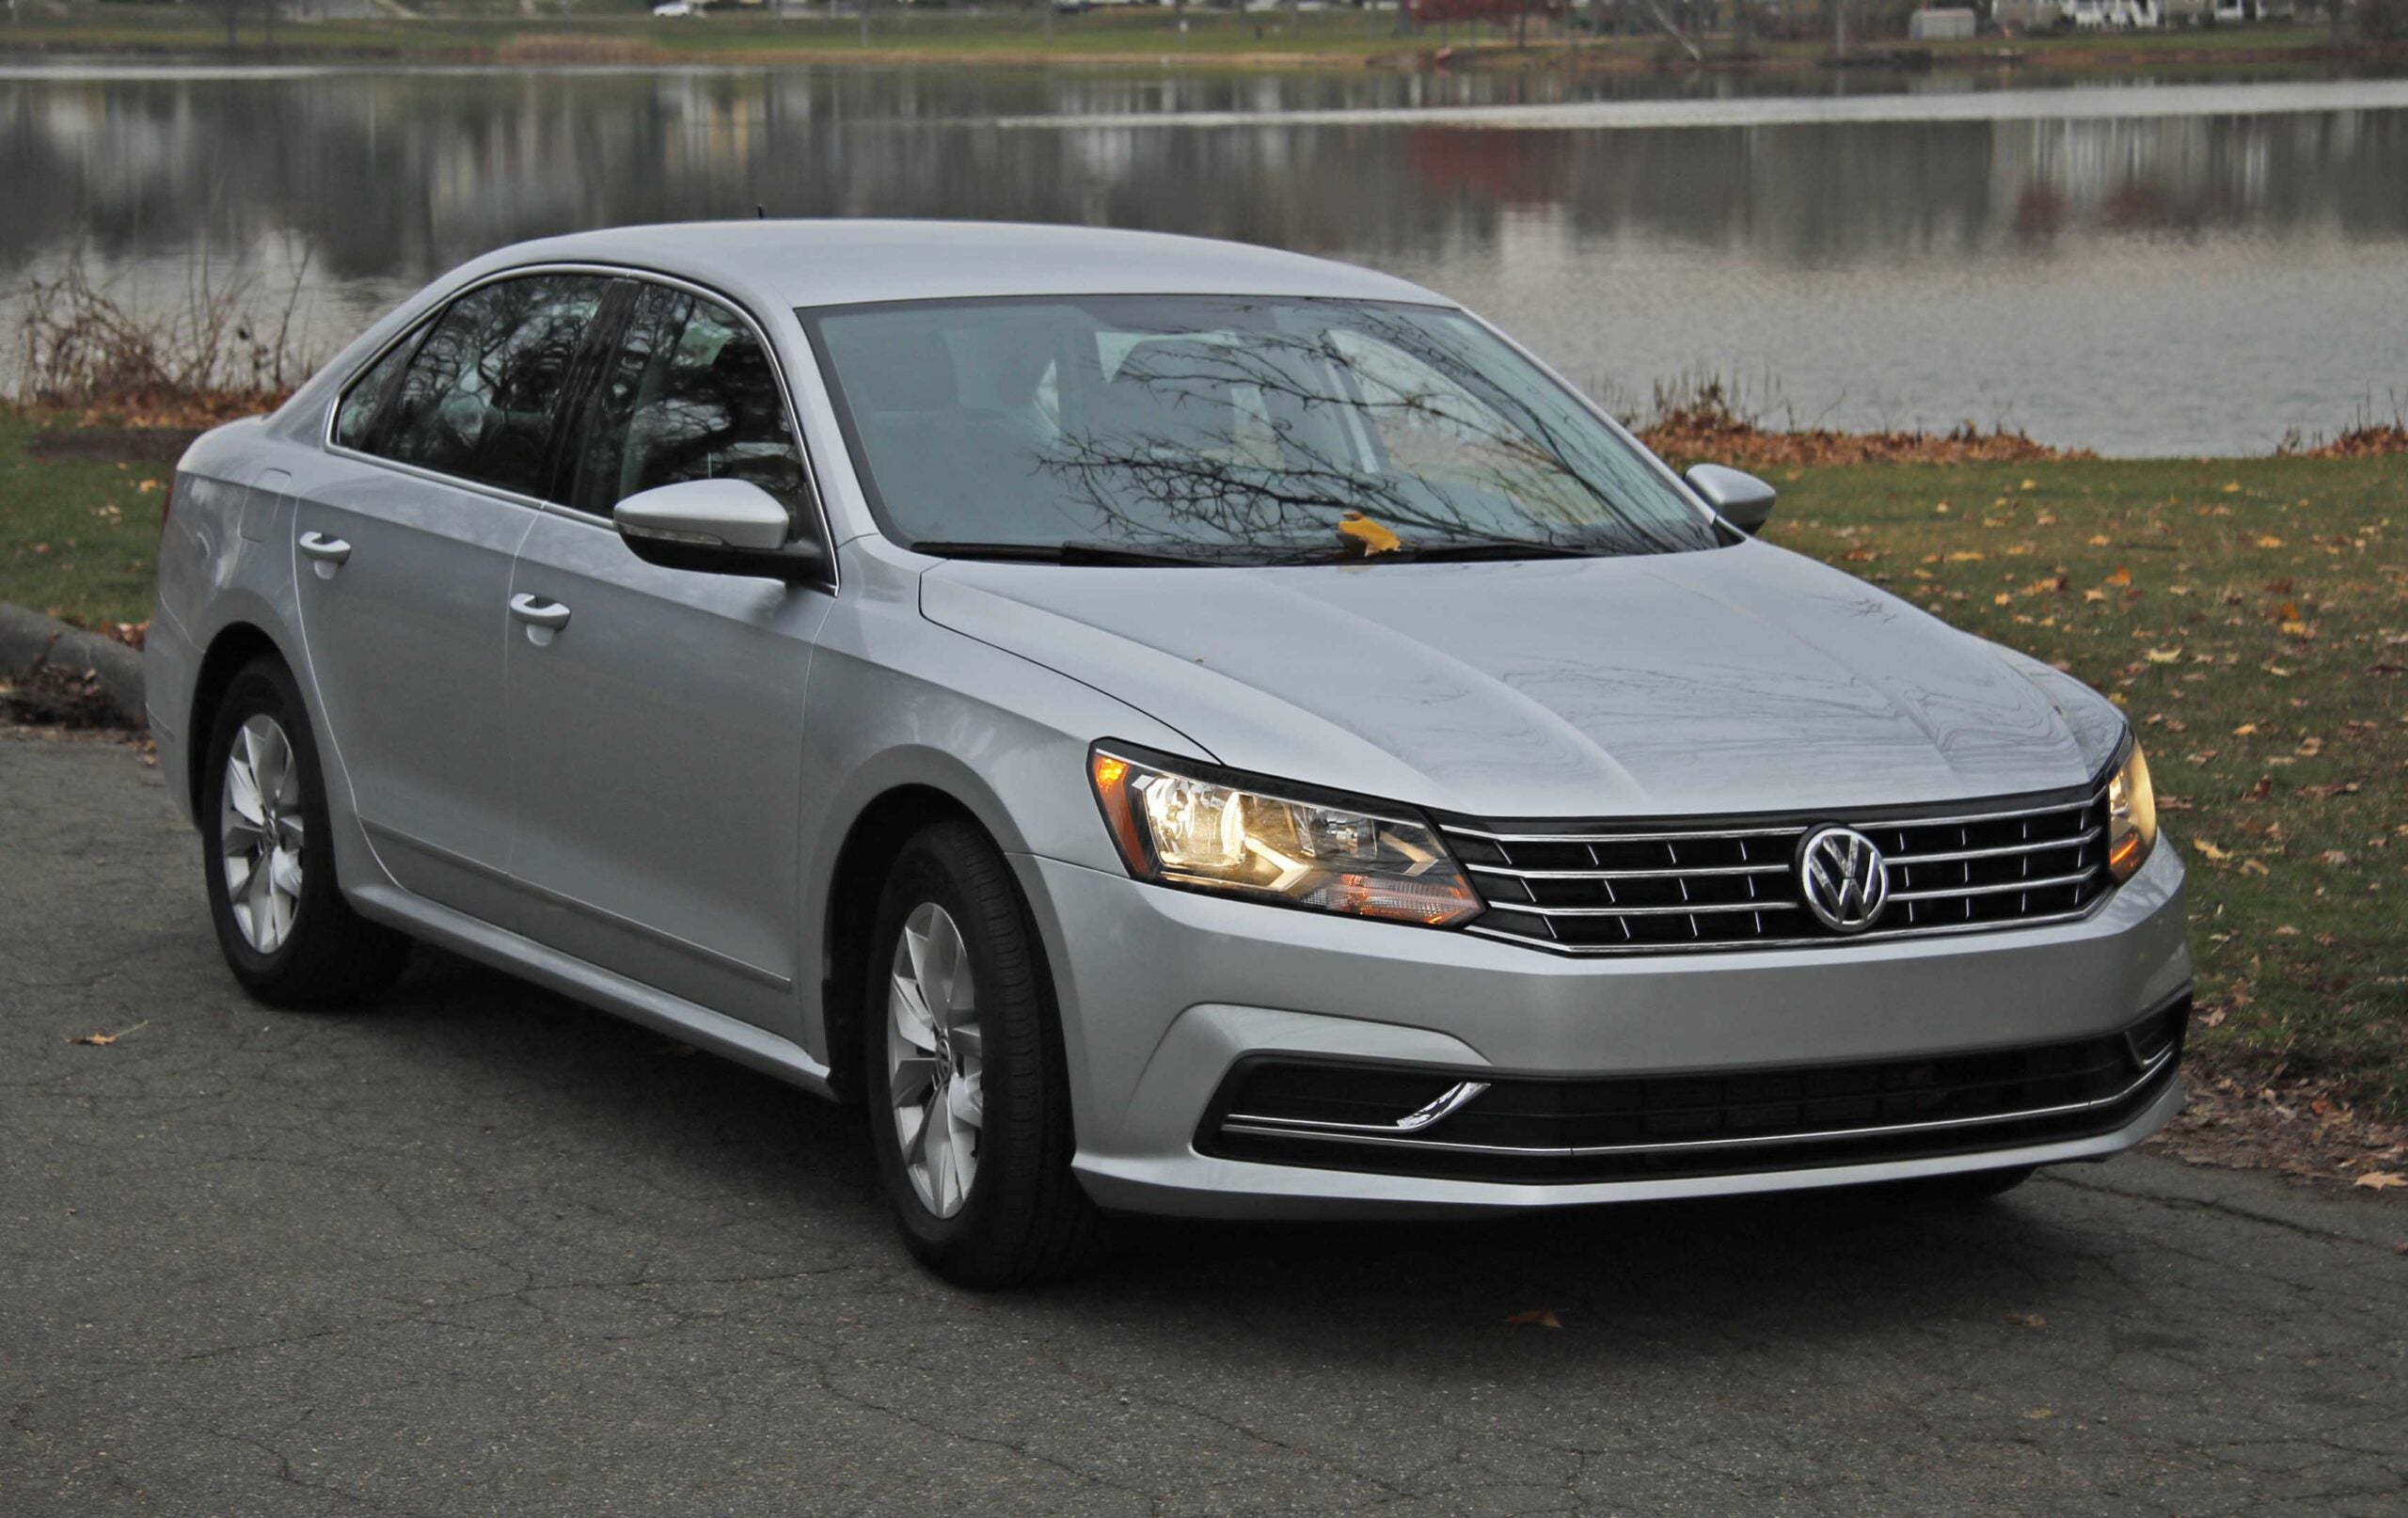 2016 VW Passat 1.8T S has style without the extras